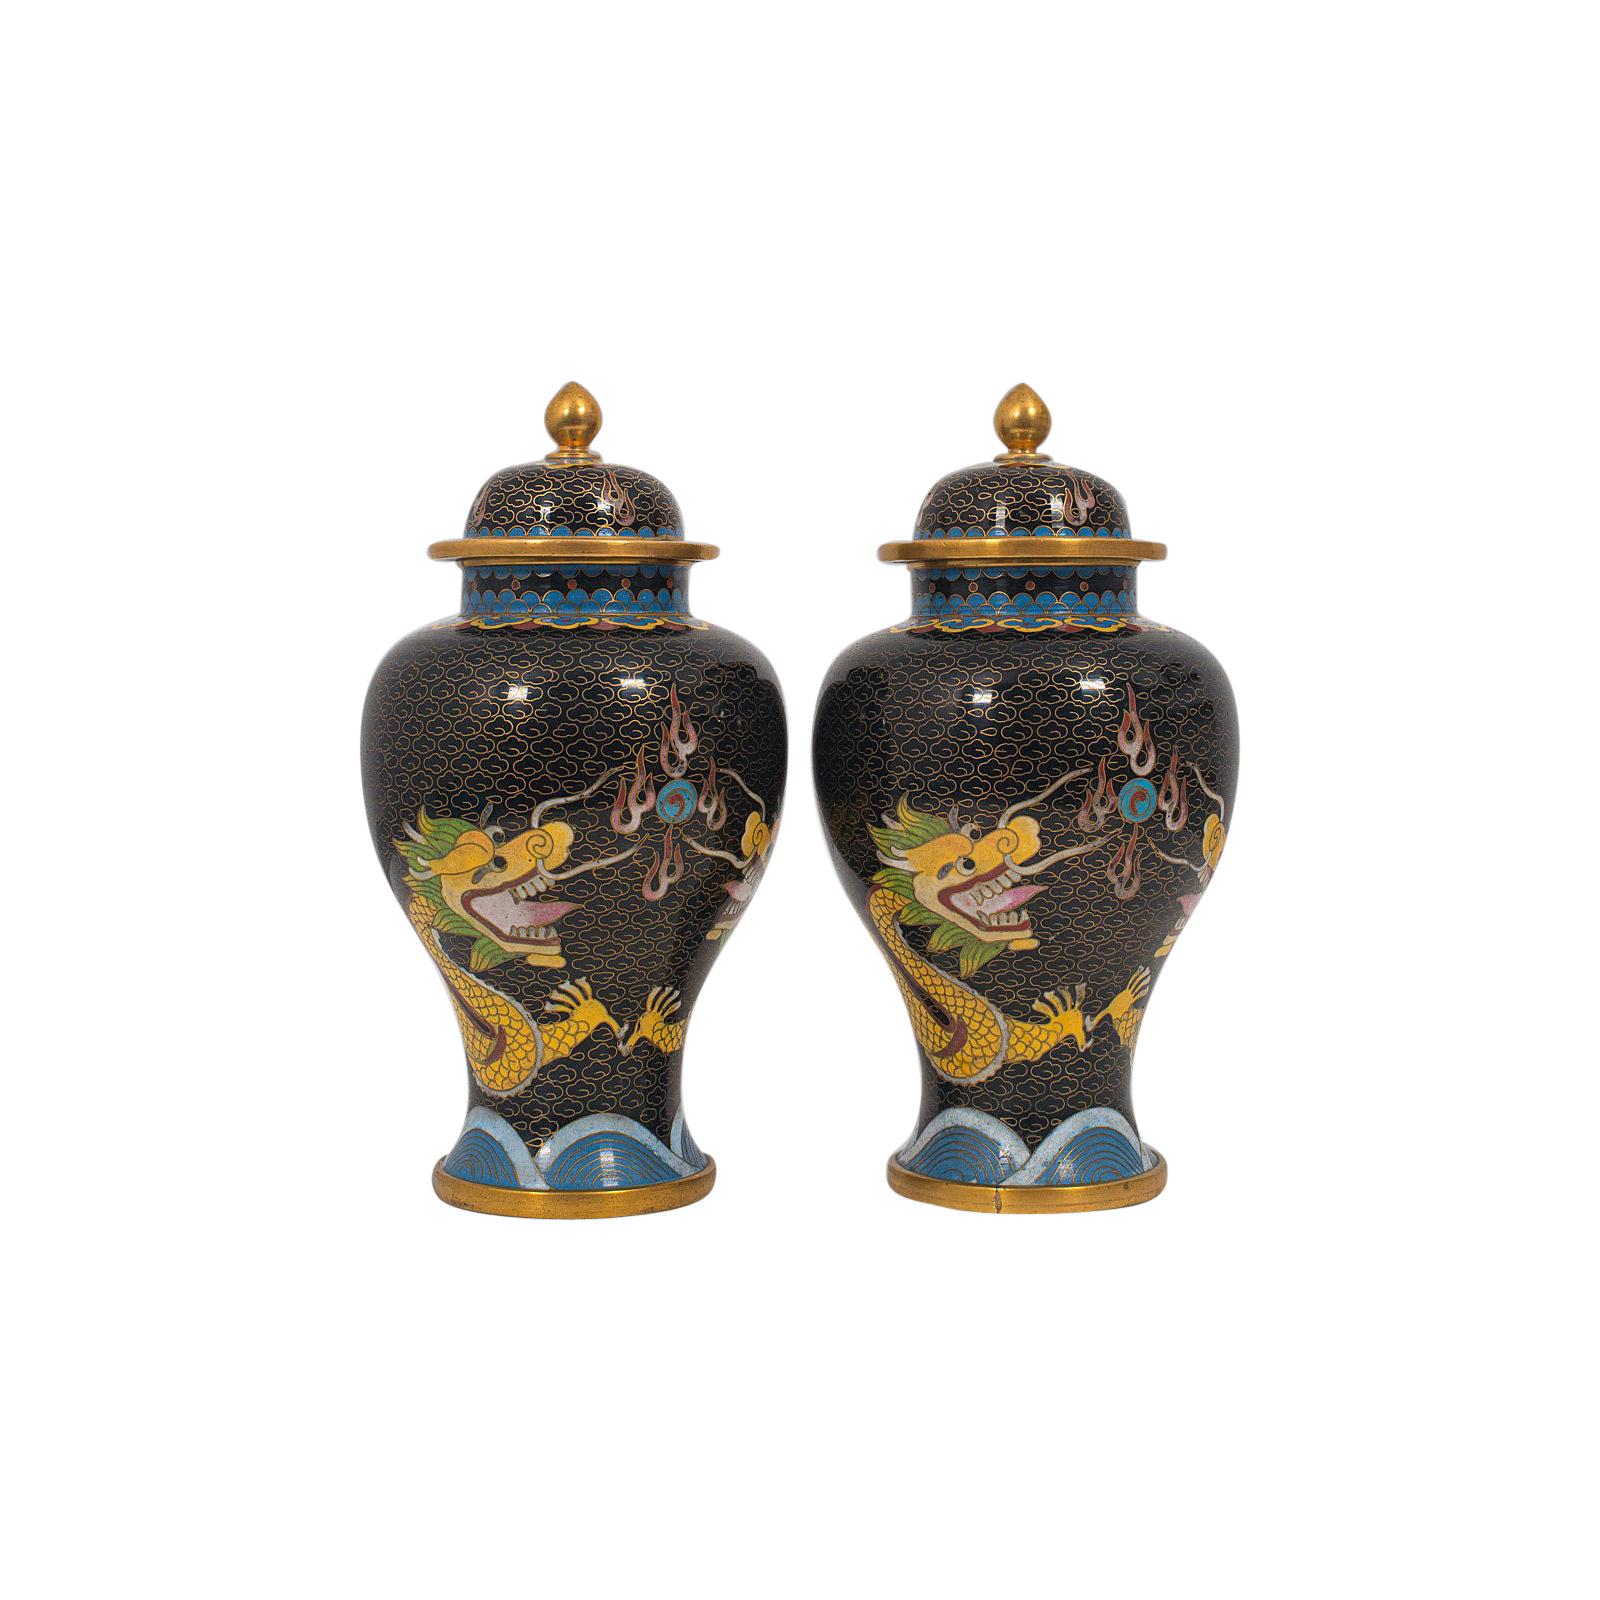 Antique Decorative Spice Jars, Chinese, Cloisonné, Baluster Urn circa 1900, Pair For Sale